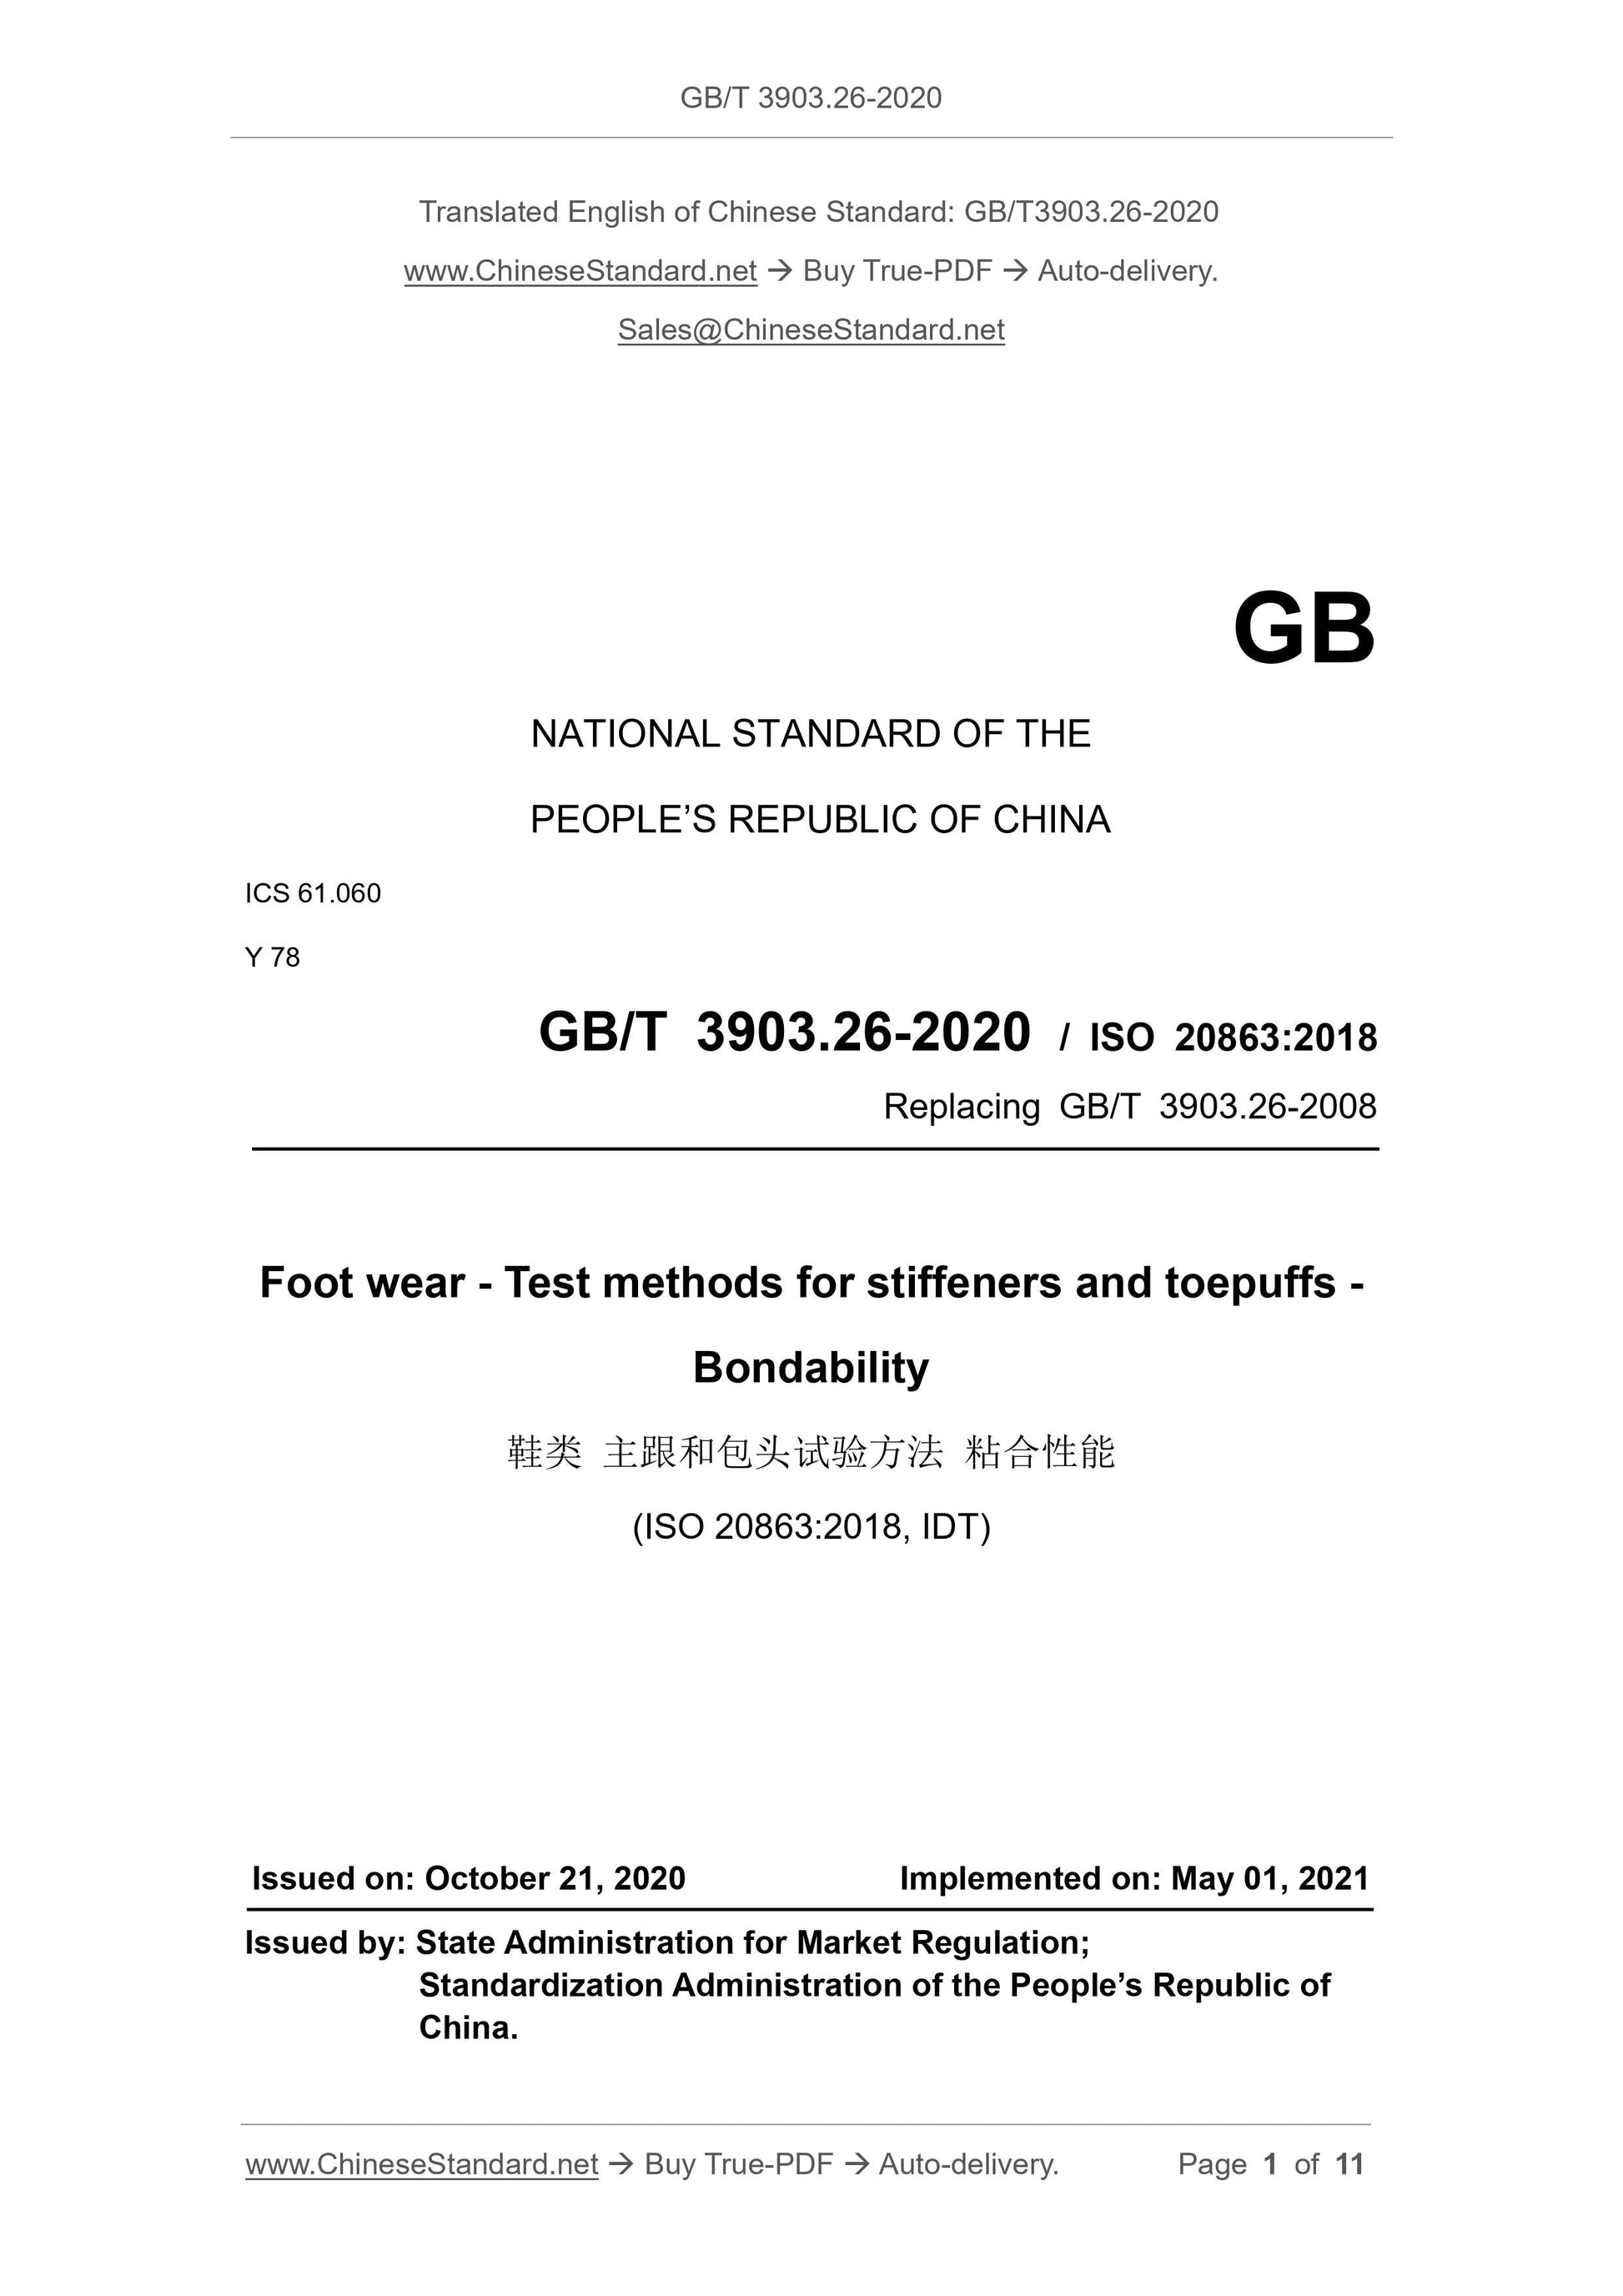 GB/T 3903.26-2020 Page 1